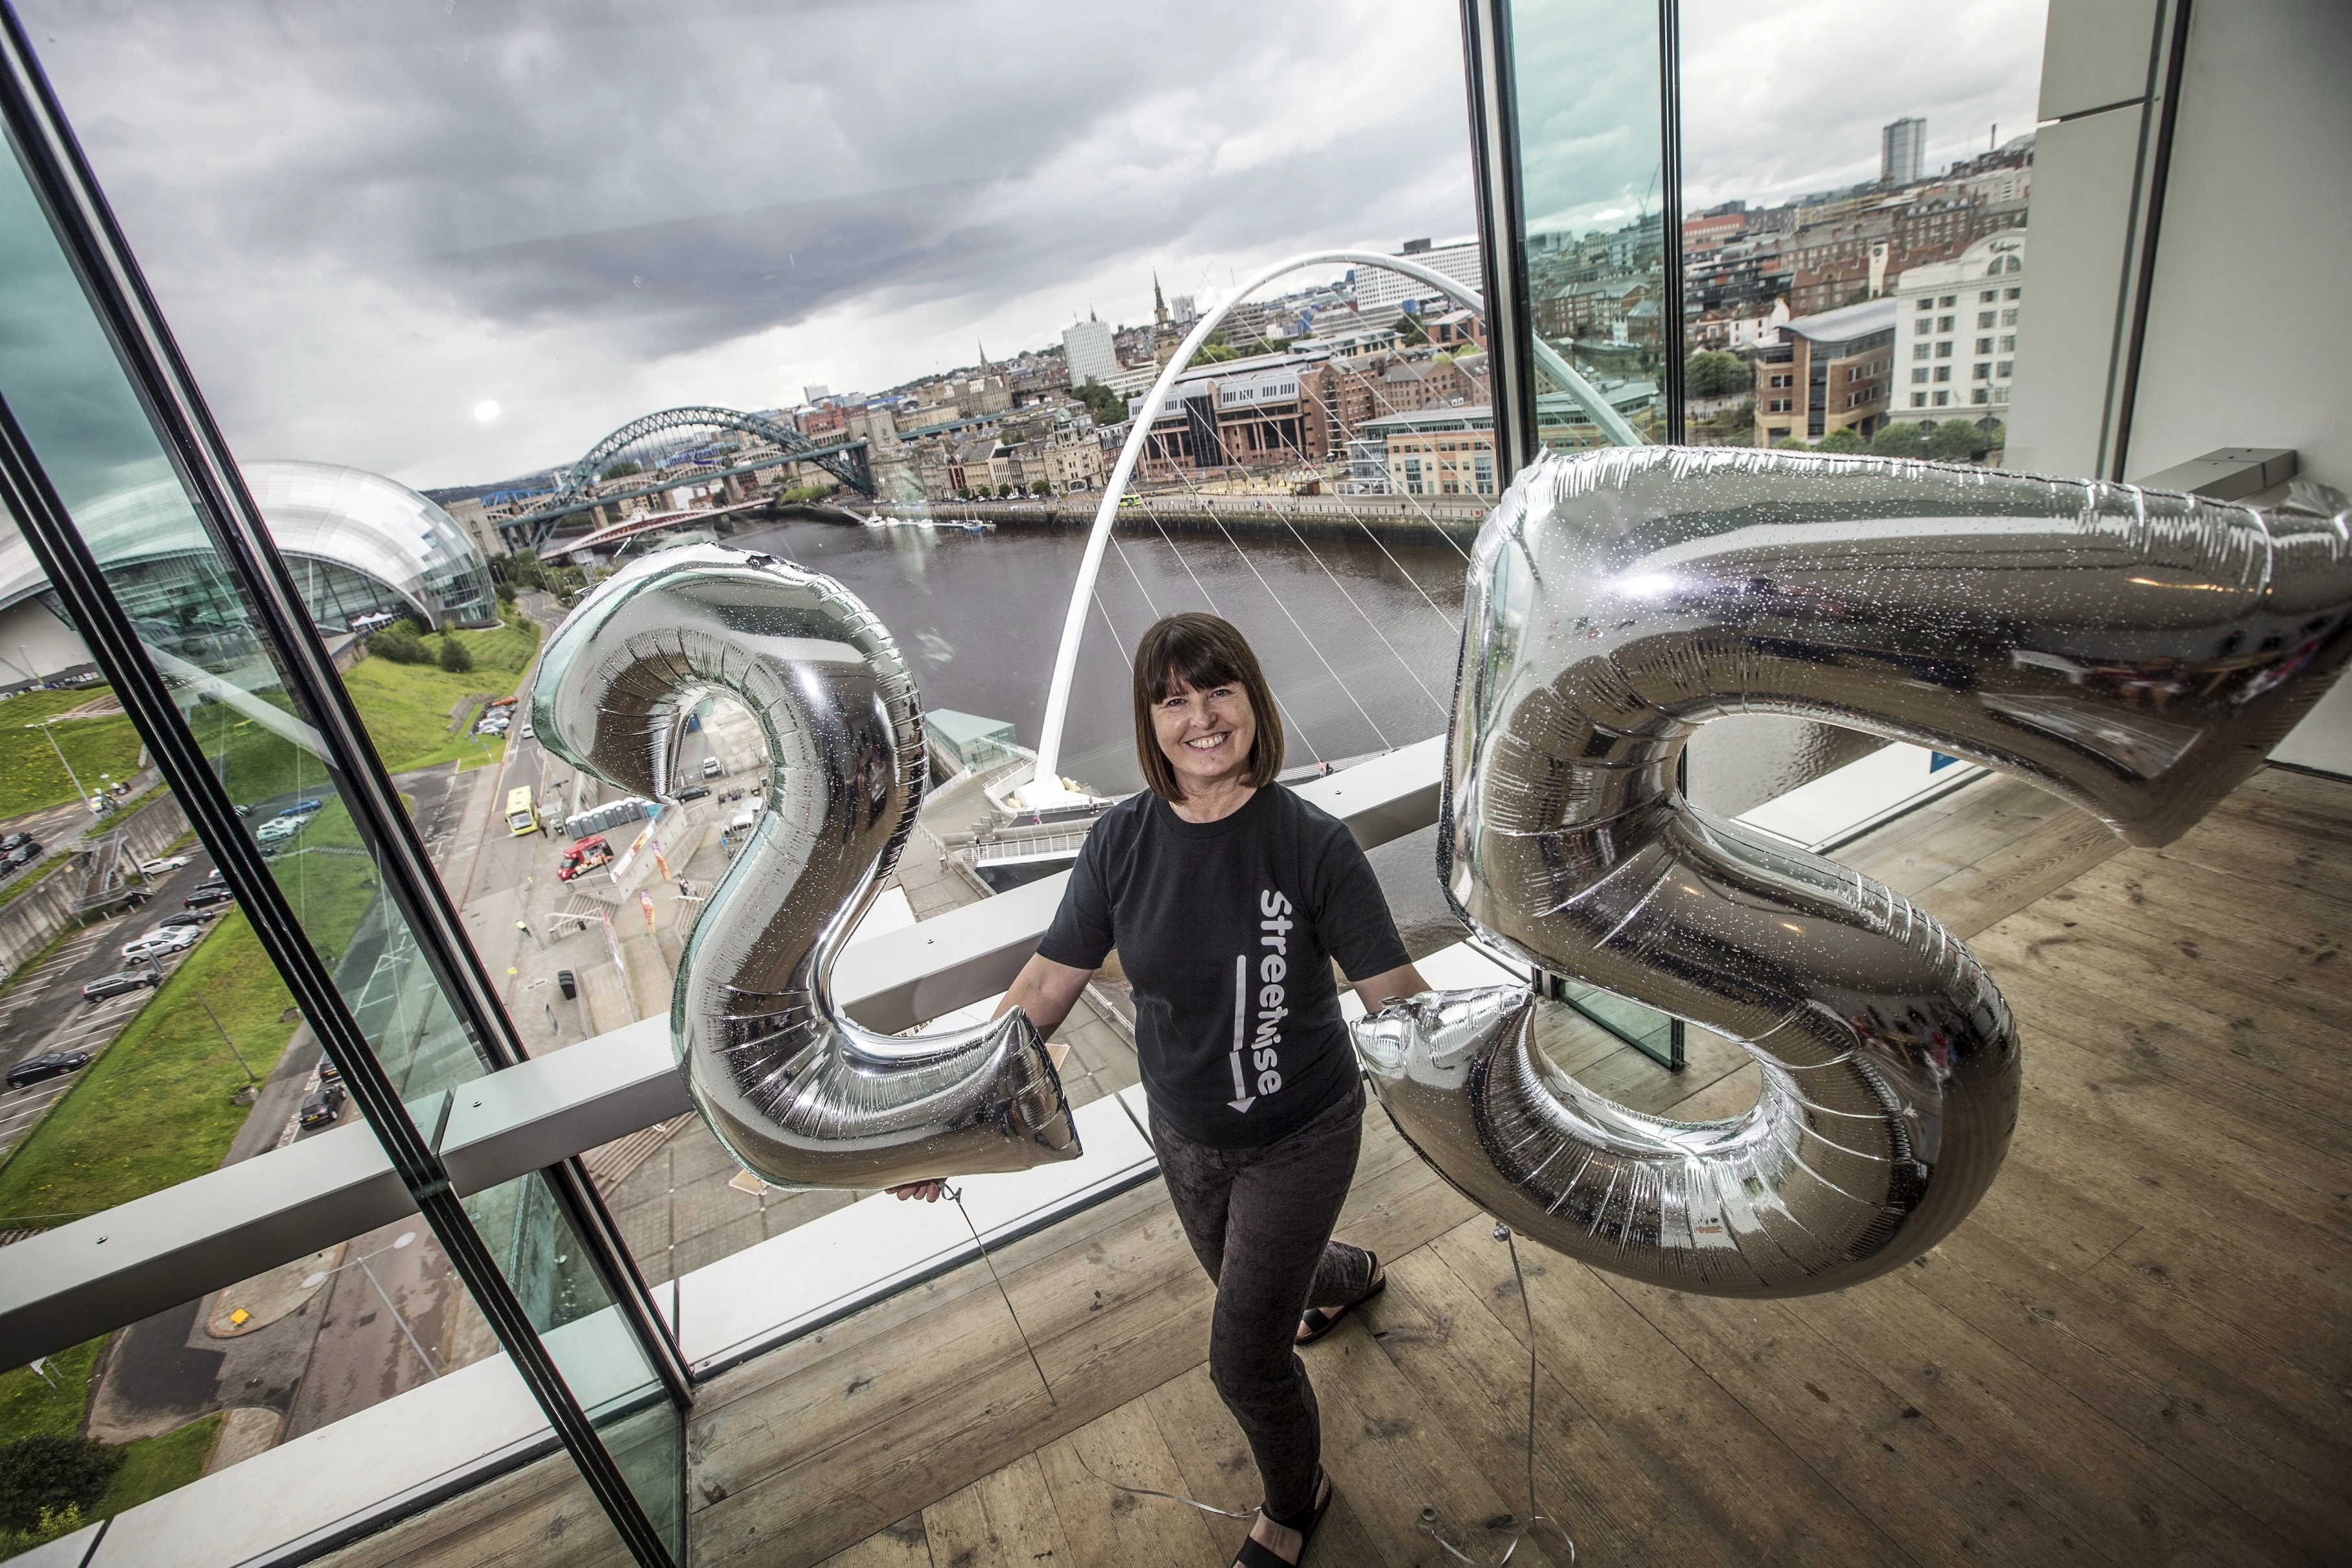 Mandy Coppin, chief executive of Streetwise celebrates 25 years of Streetwise success in the North East. 